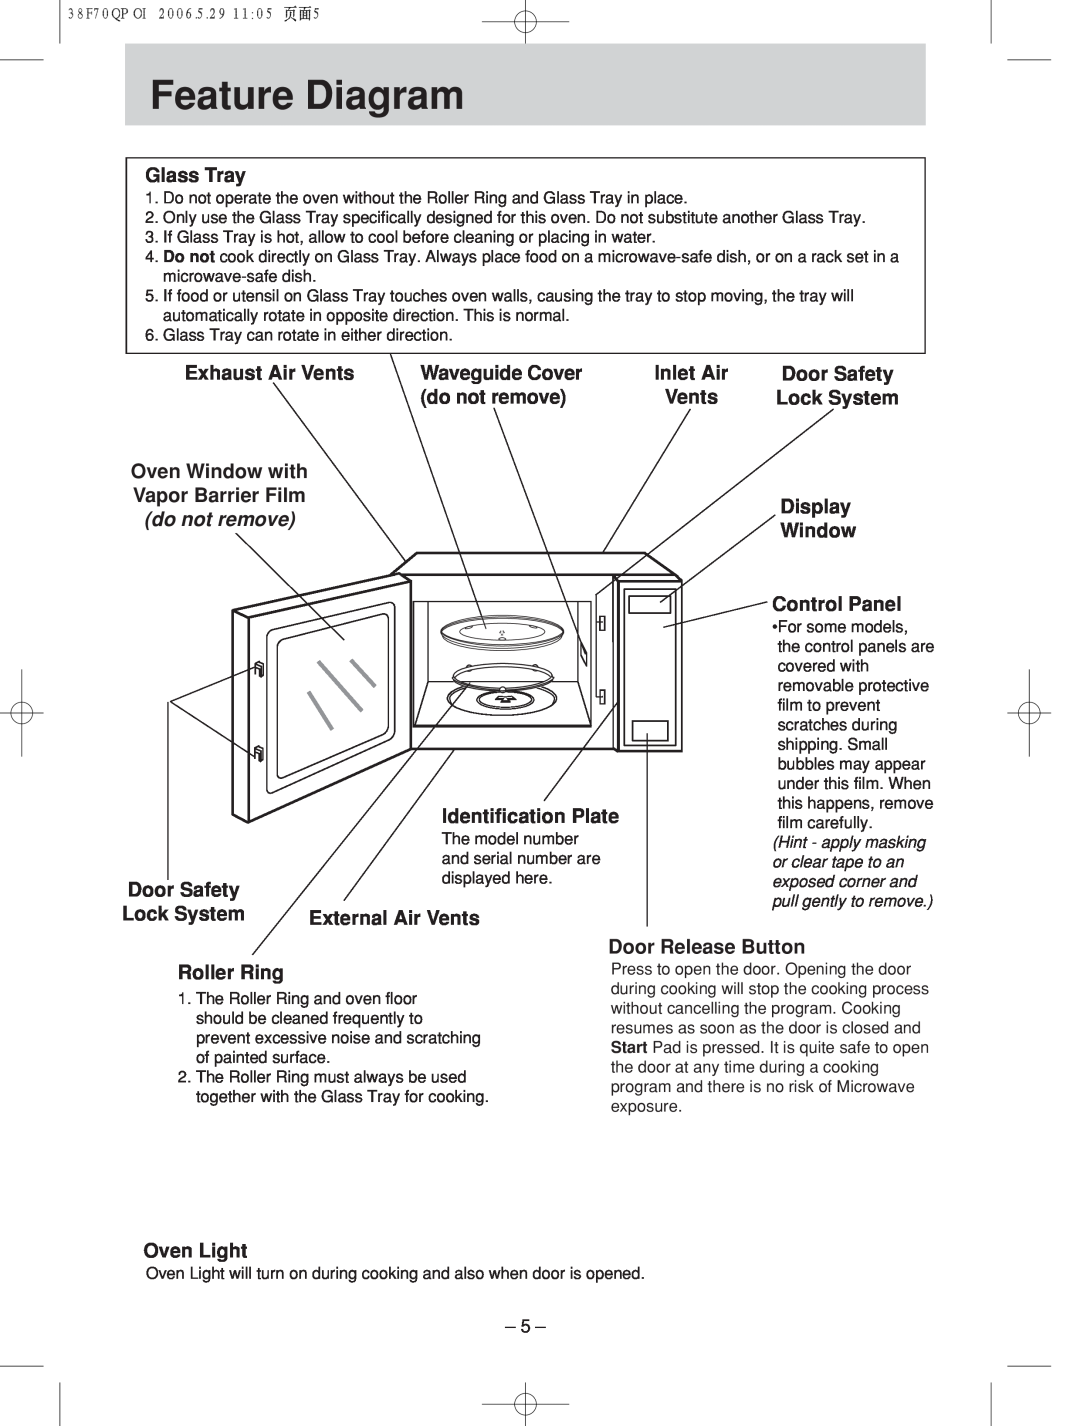 Panasonic NN-ST676M manual Feature!!!!! ! Diagram, Glass Tray, Exhaust Air Vents, Waveguide Cover, Inlet Air, do not remove 